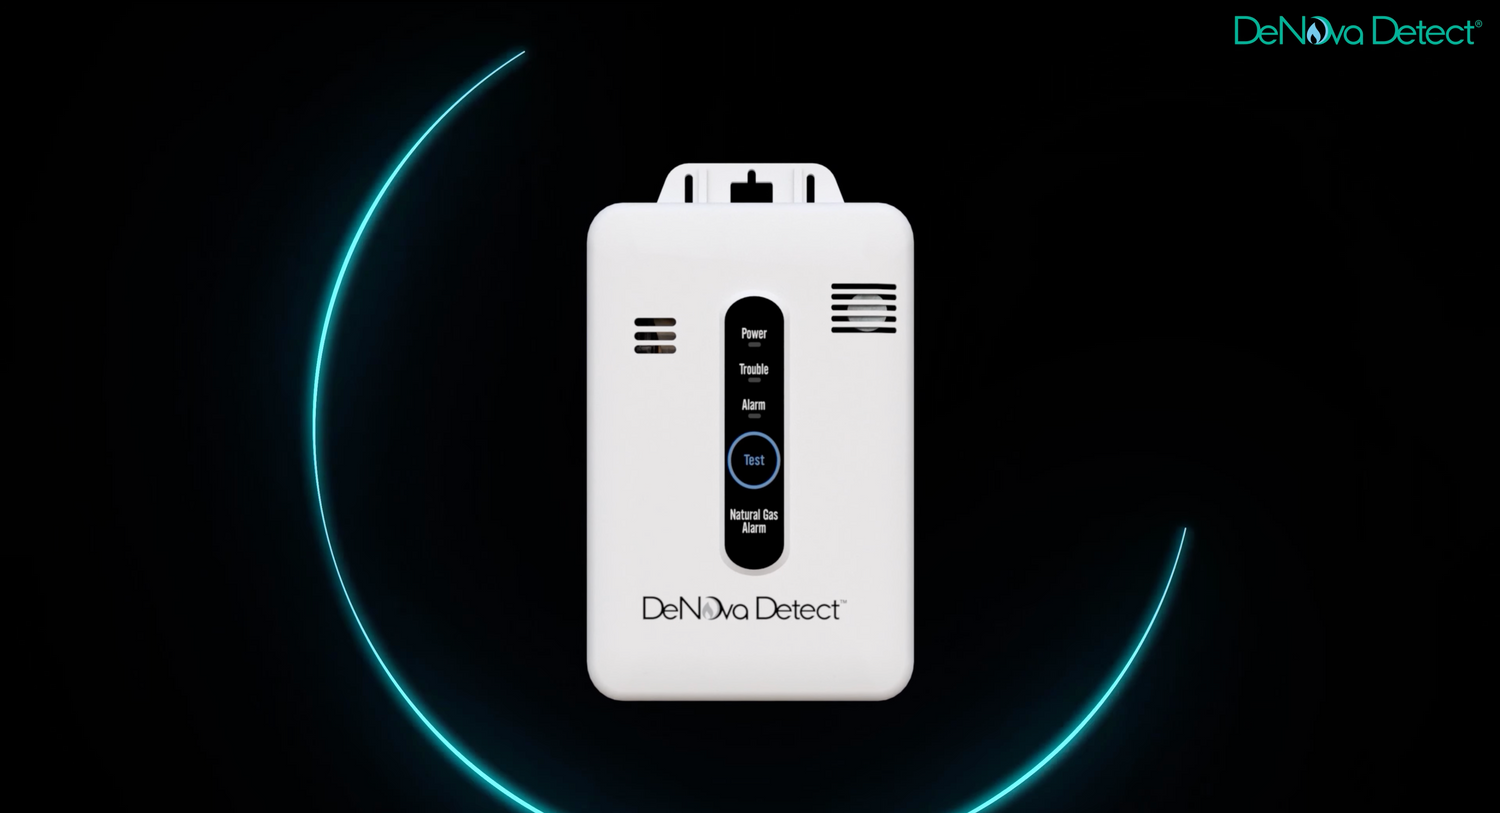 Announcing New DeNova Detect Smart Natural Gas Alarm Product Line to Debut at the Consumer Electronics Show 2023